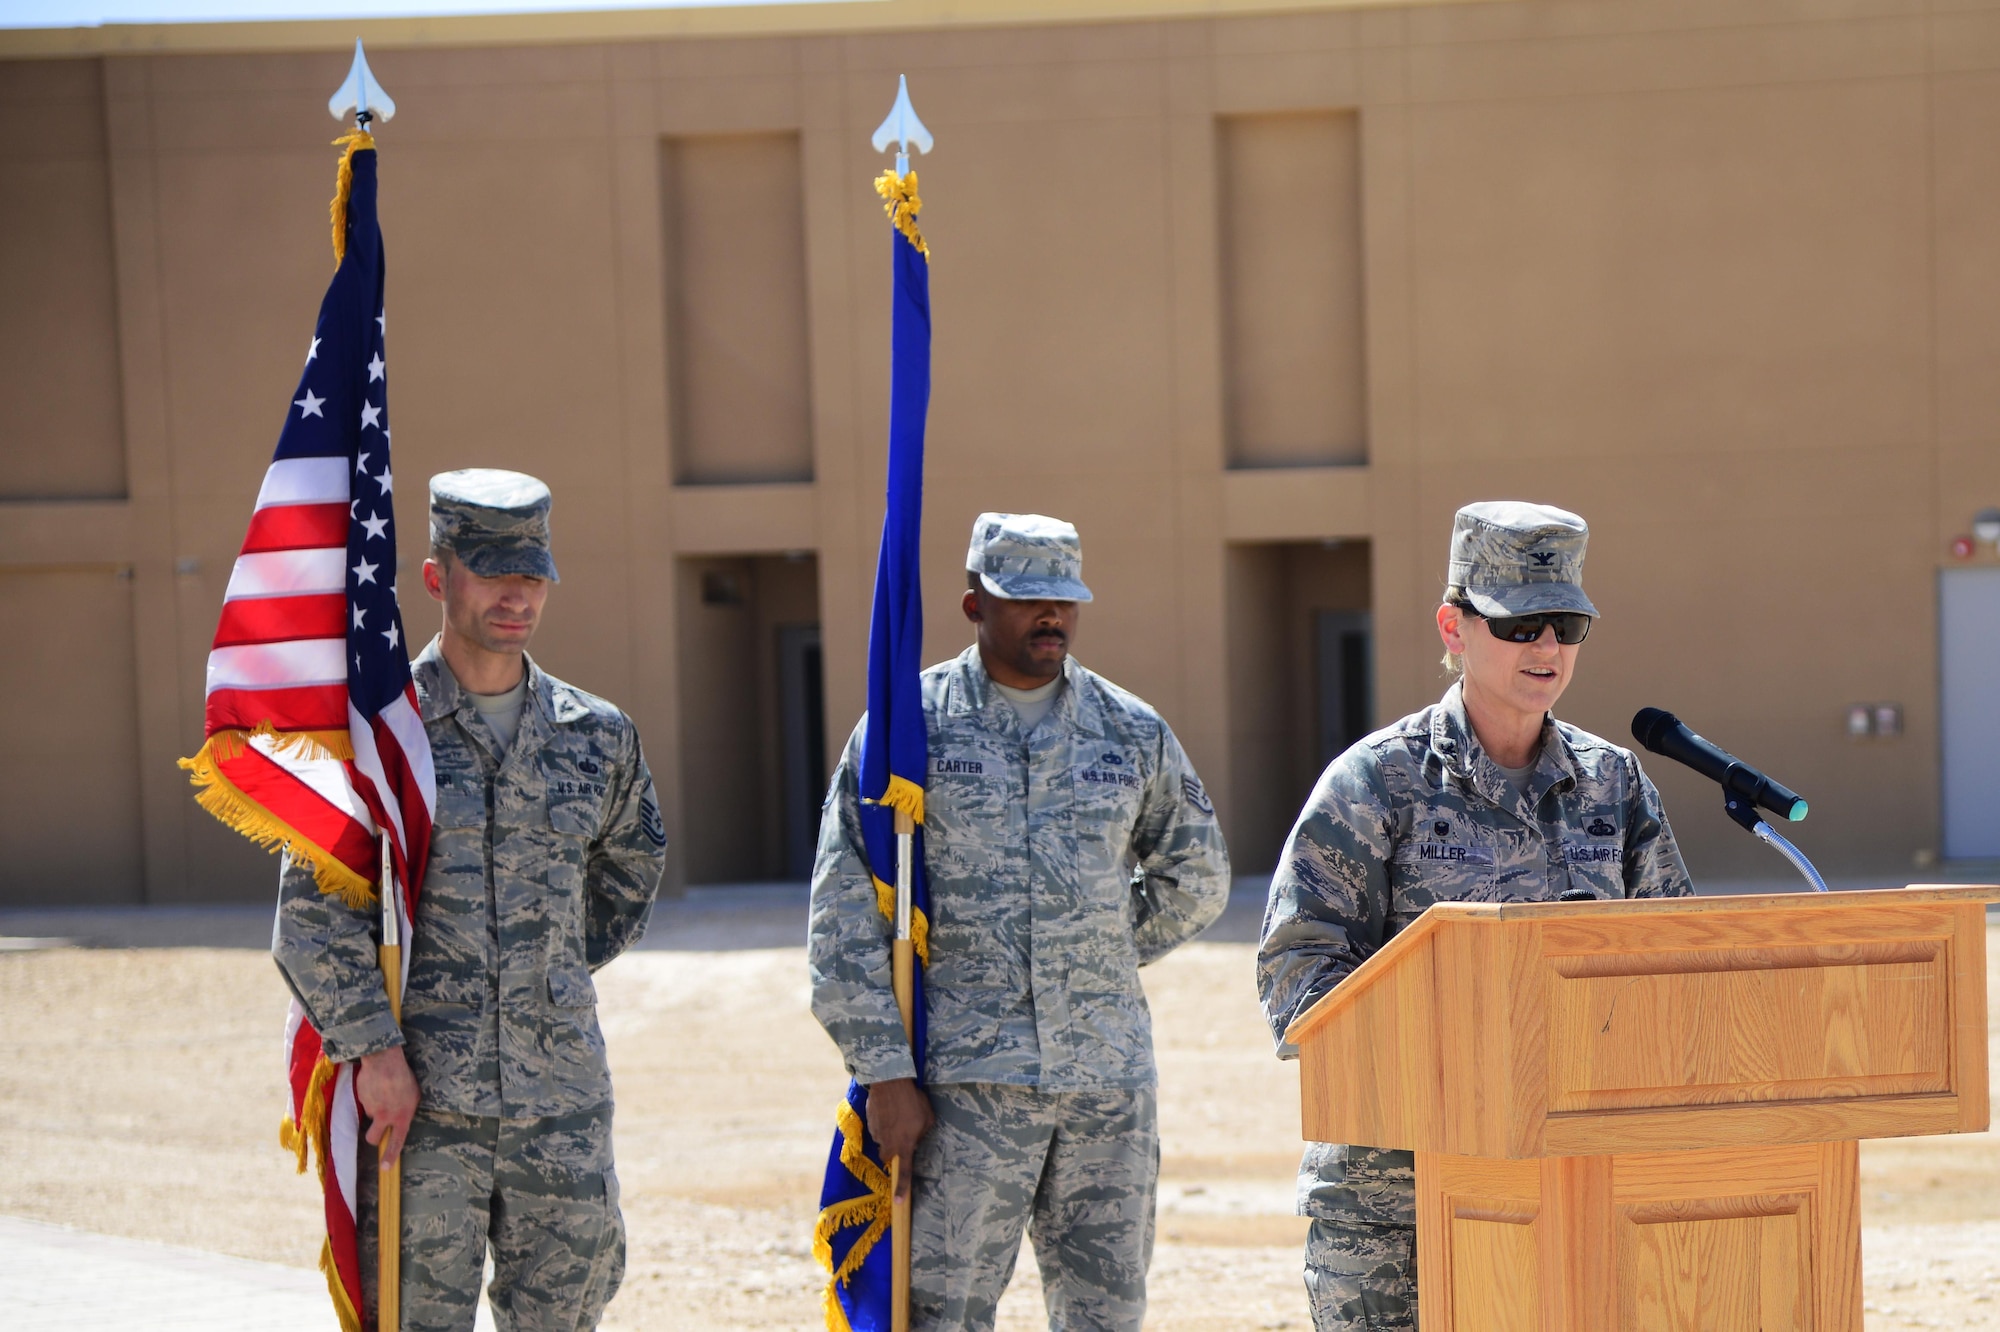 U.S. Air Force Col. Caroline Miller, 379th Expeditionary Mission Support Group commander, gives remarks during a linen cutting ceremony, April 3, 2015, at Al Udeid Air Base, Qatar. The linen cutting ceremony symbolized the opening of the new Phase II dormitories in the Blatchford-Preston Complex. (U.S. Air Force photo by Senior Airman Kia Atkins)